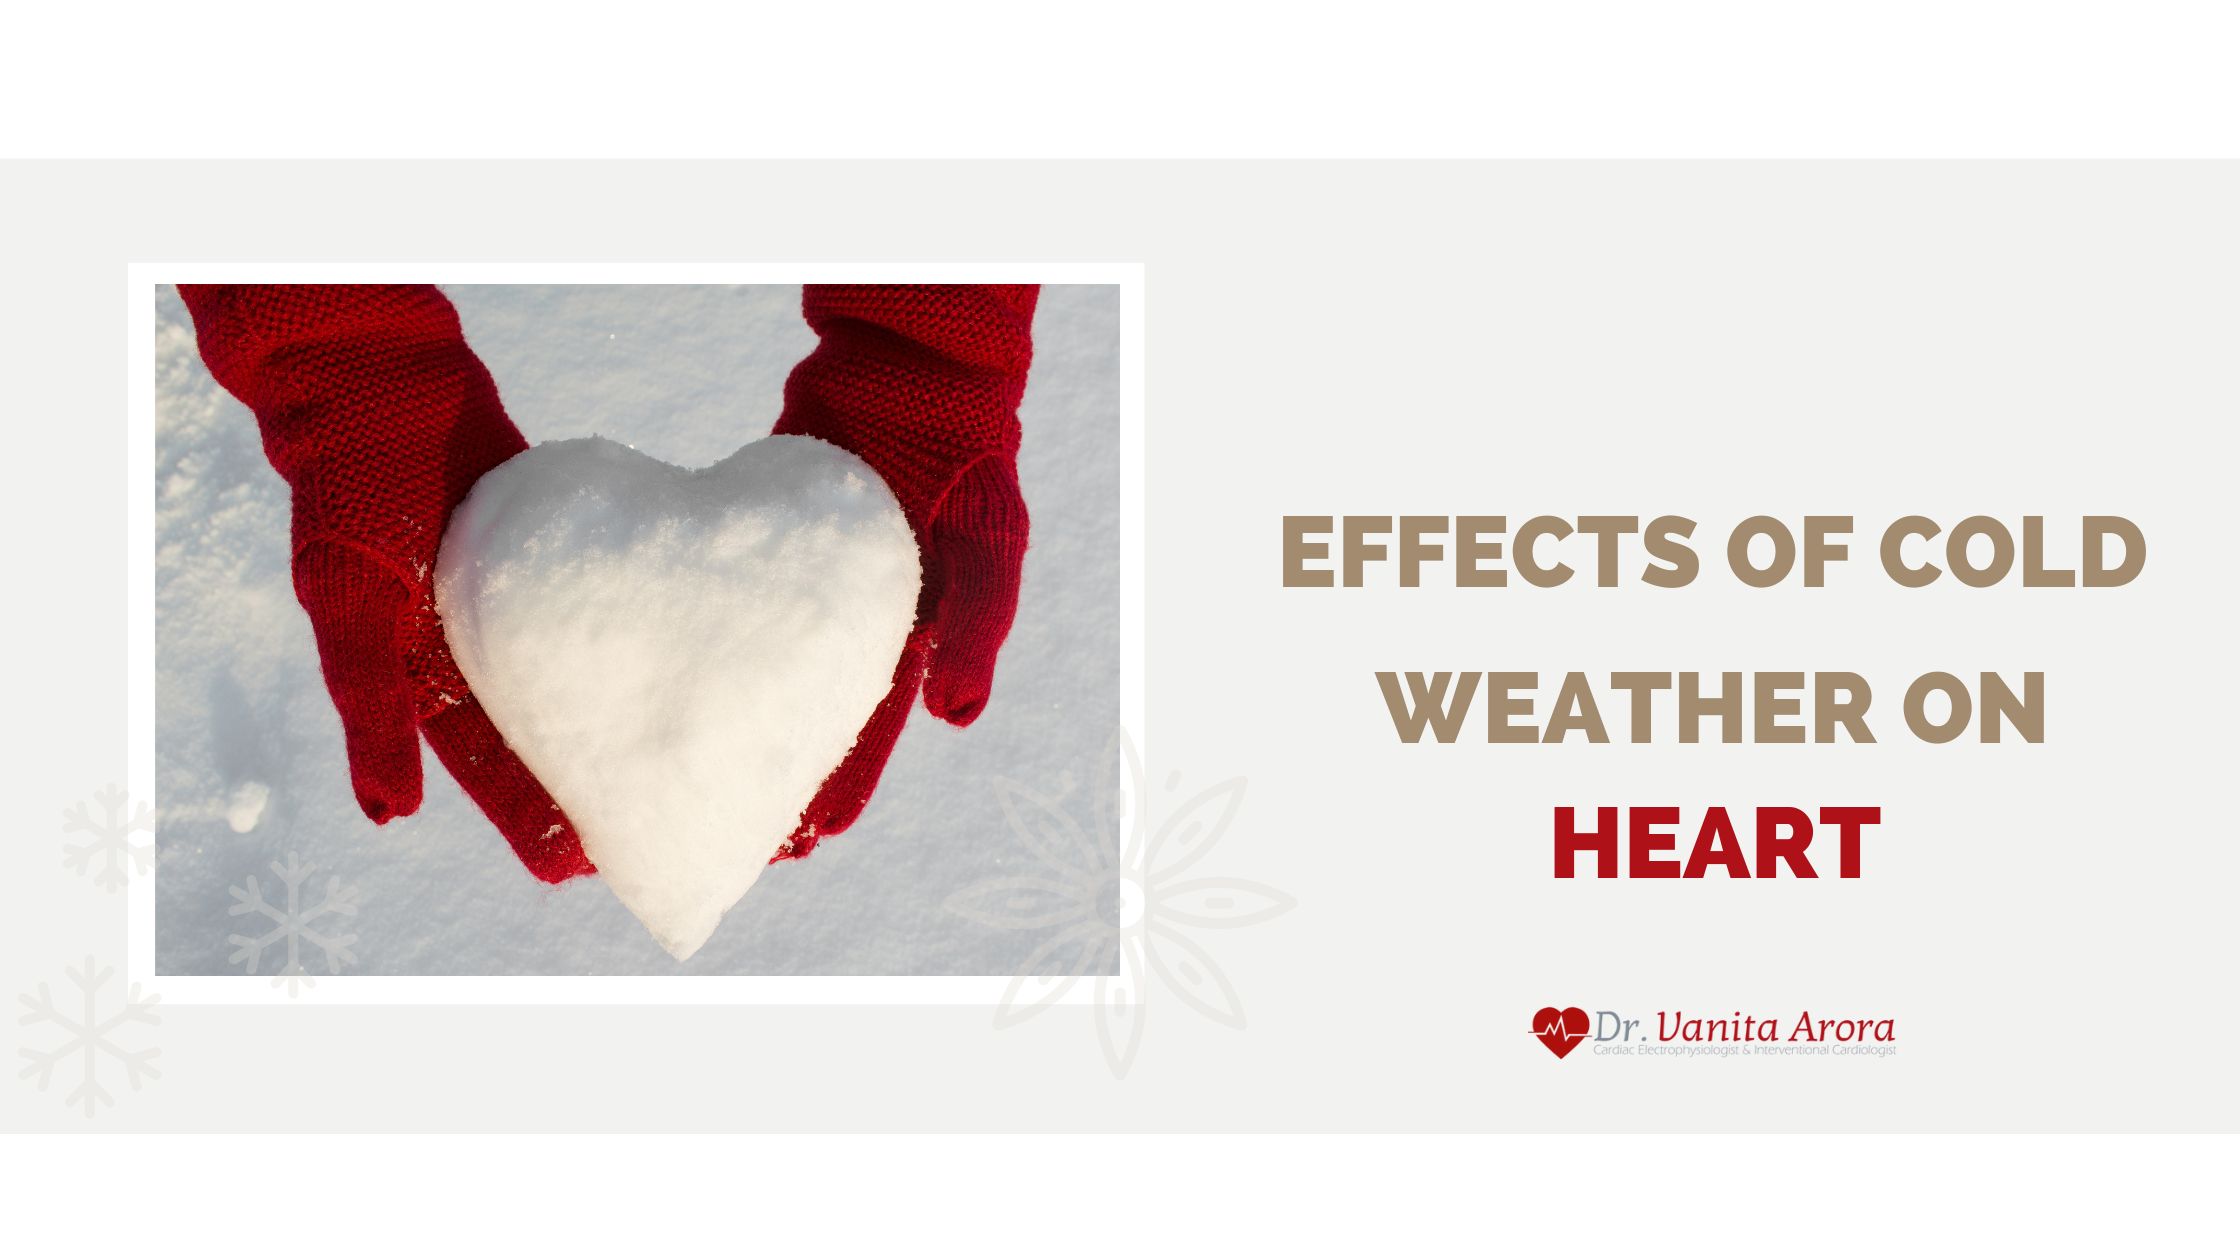 Effects of Cold Weather on Heart